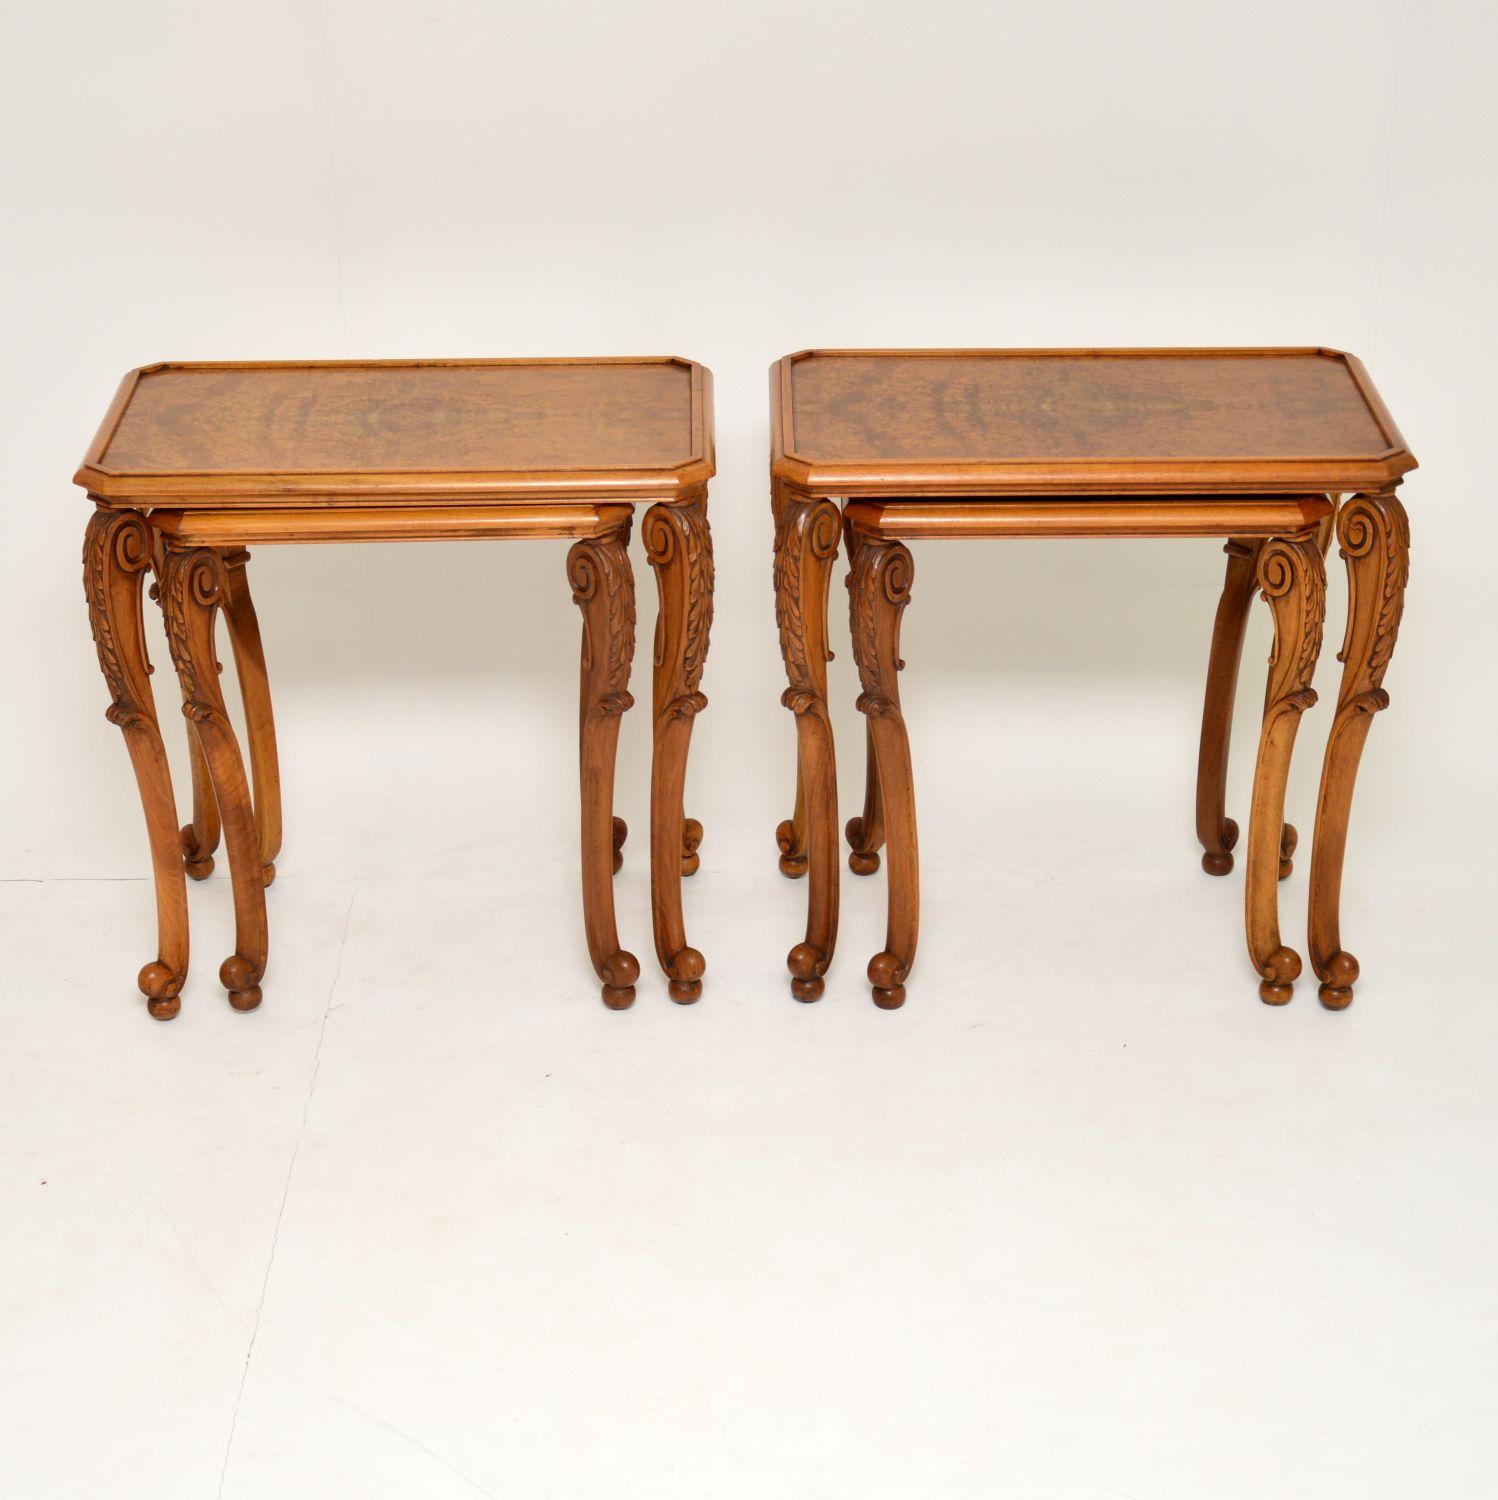 Unusual pair of antique walnut nests of two tables dating from the 1920s period, in excellent condition, having just been French polished. These tables would work well either side of a sofa as side tables & are very practicable having the extra